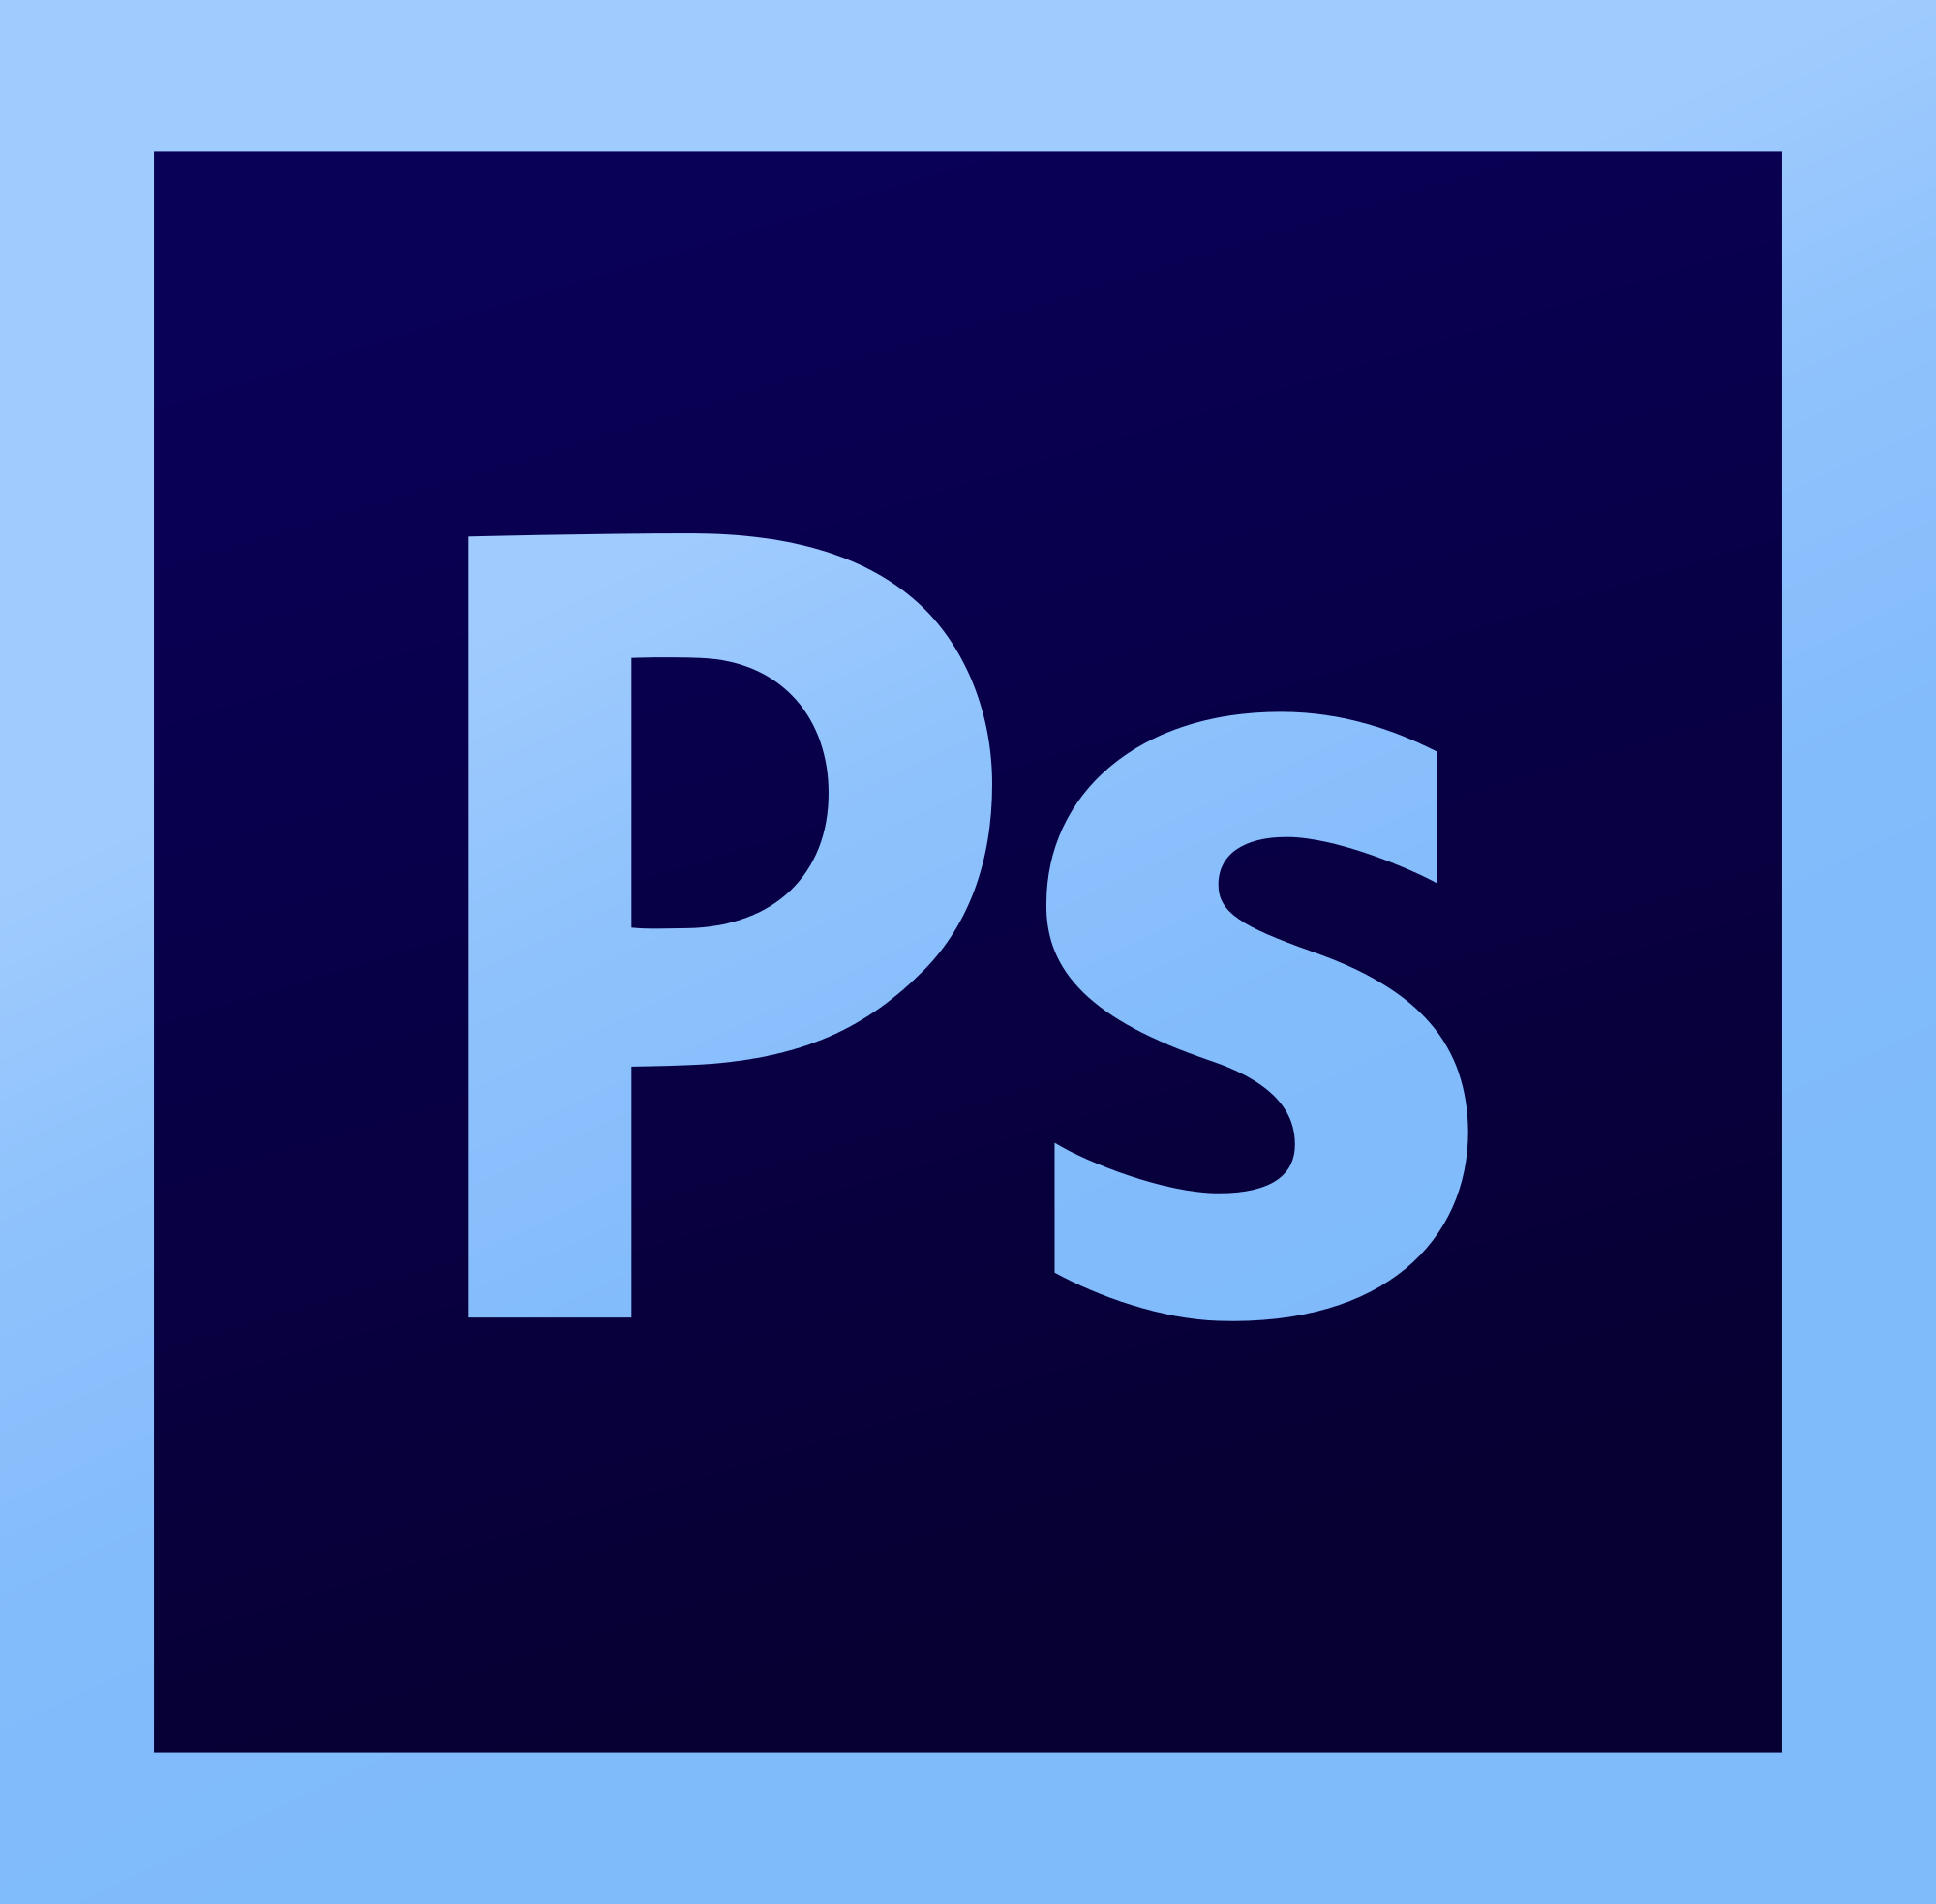 download clipart for adobe photoshop